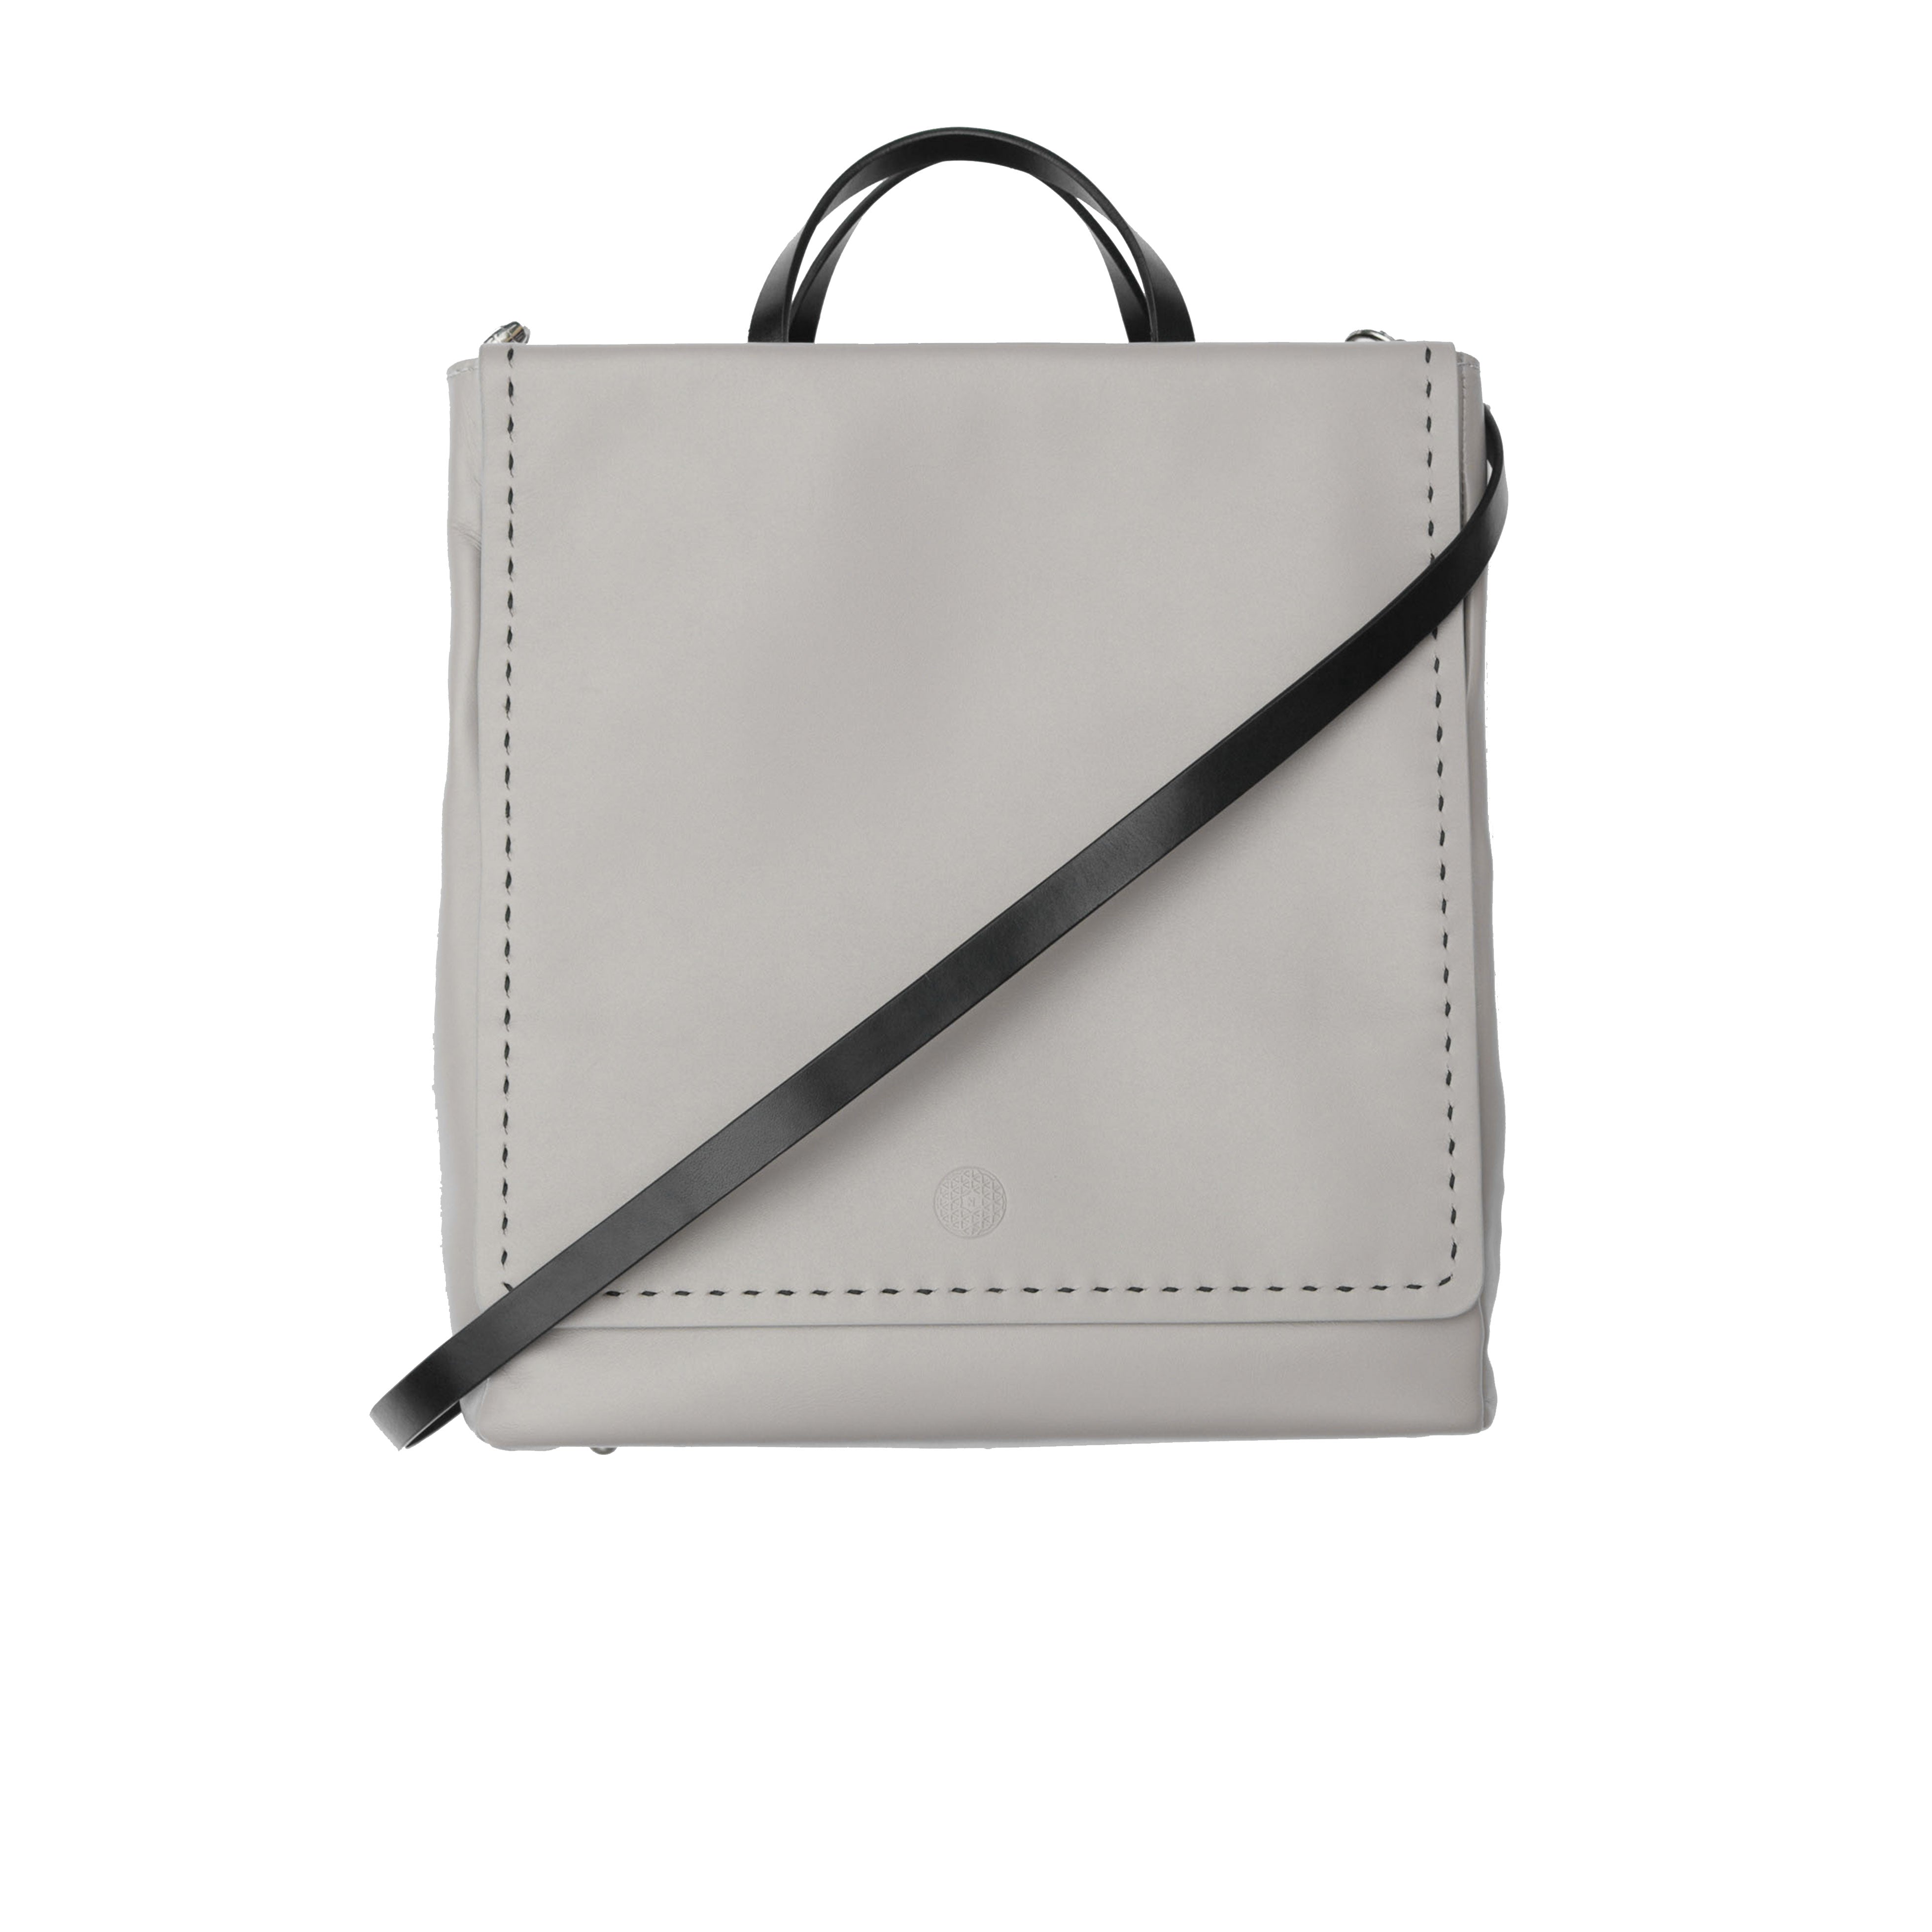 Business Tasche in Taupe - Kathy